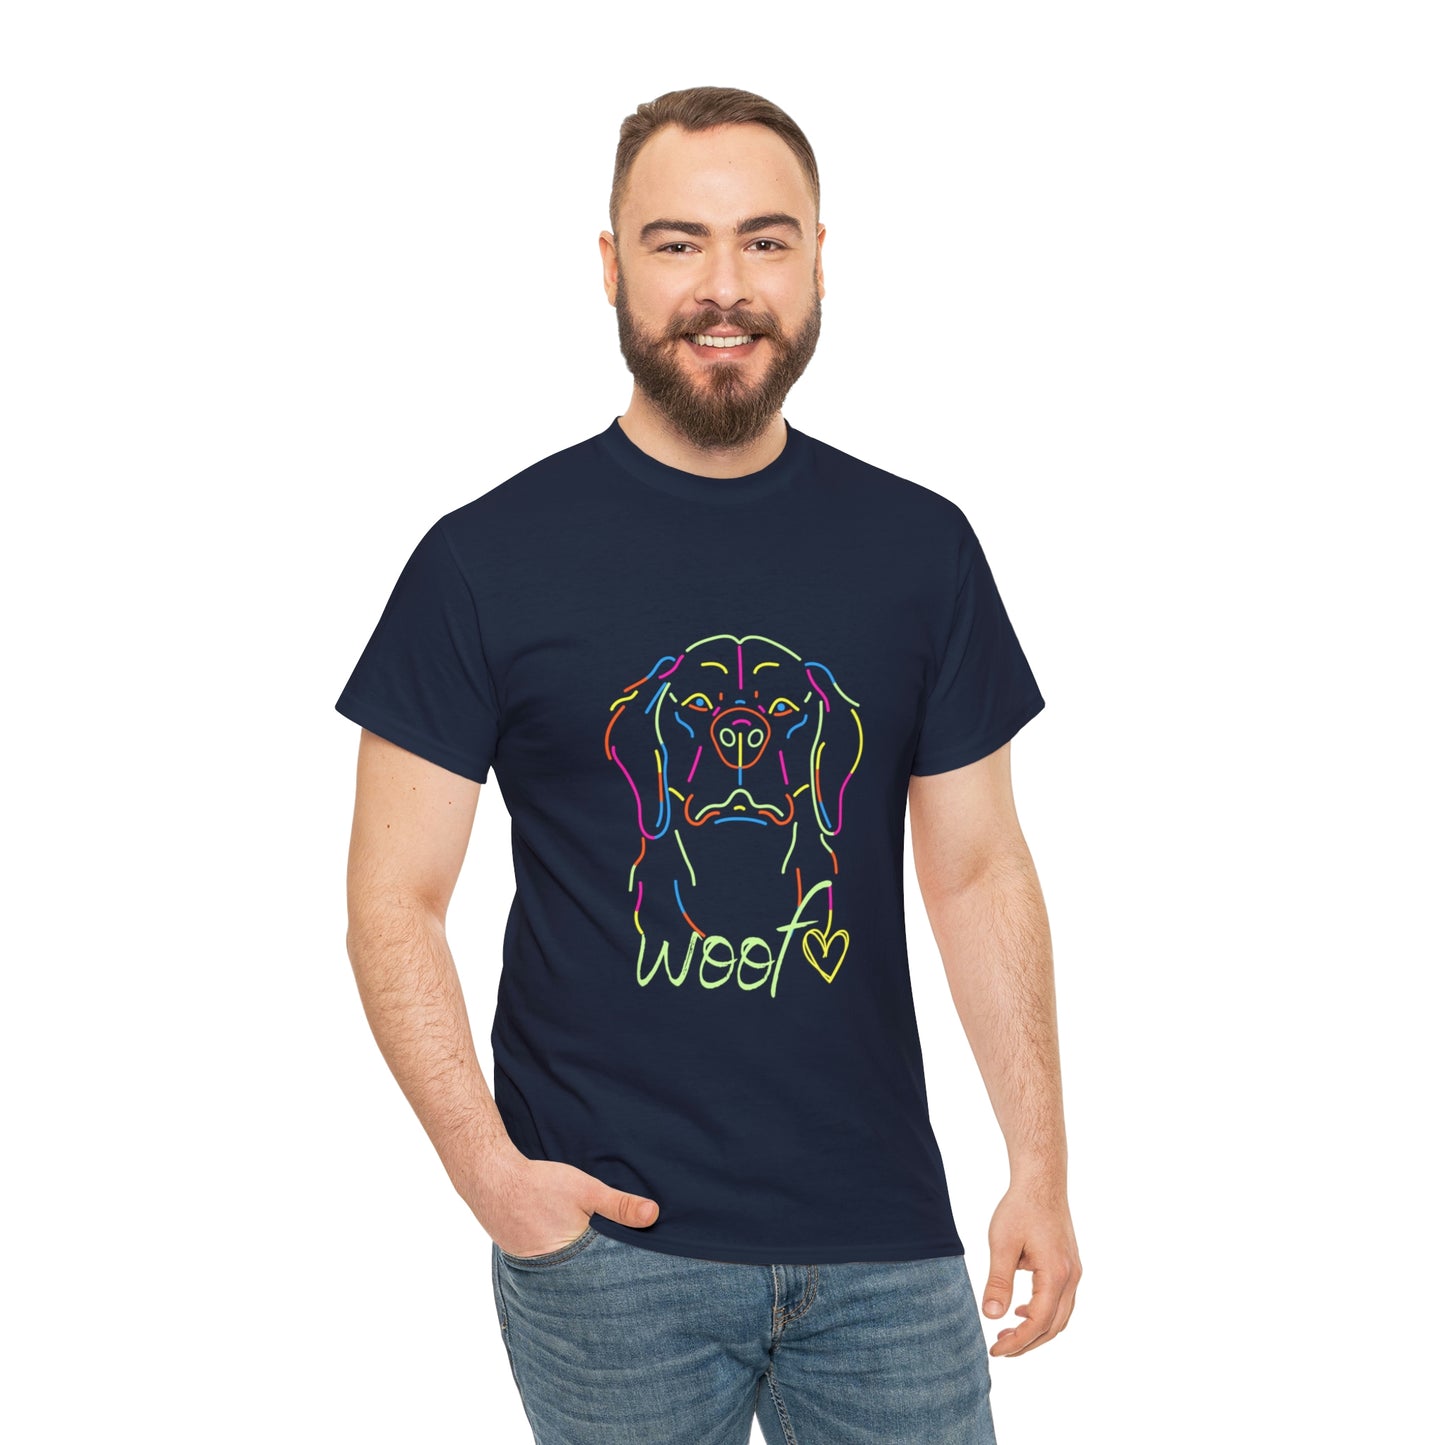 Woof dog neon Your Style Our Custom Printed Tee Unique Design Comfortable Fit Personalized for You color, funny tshirt tee shirt motivation